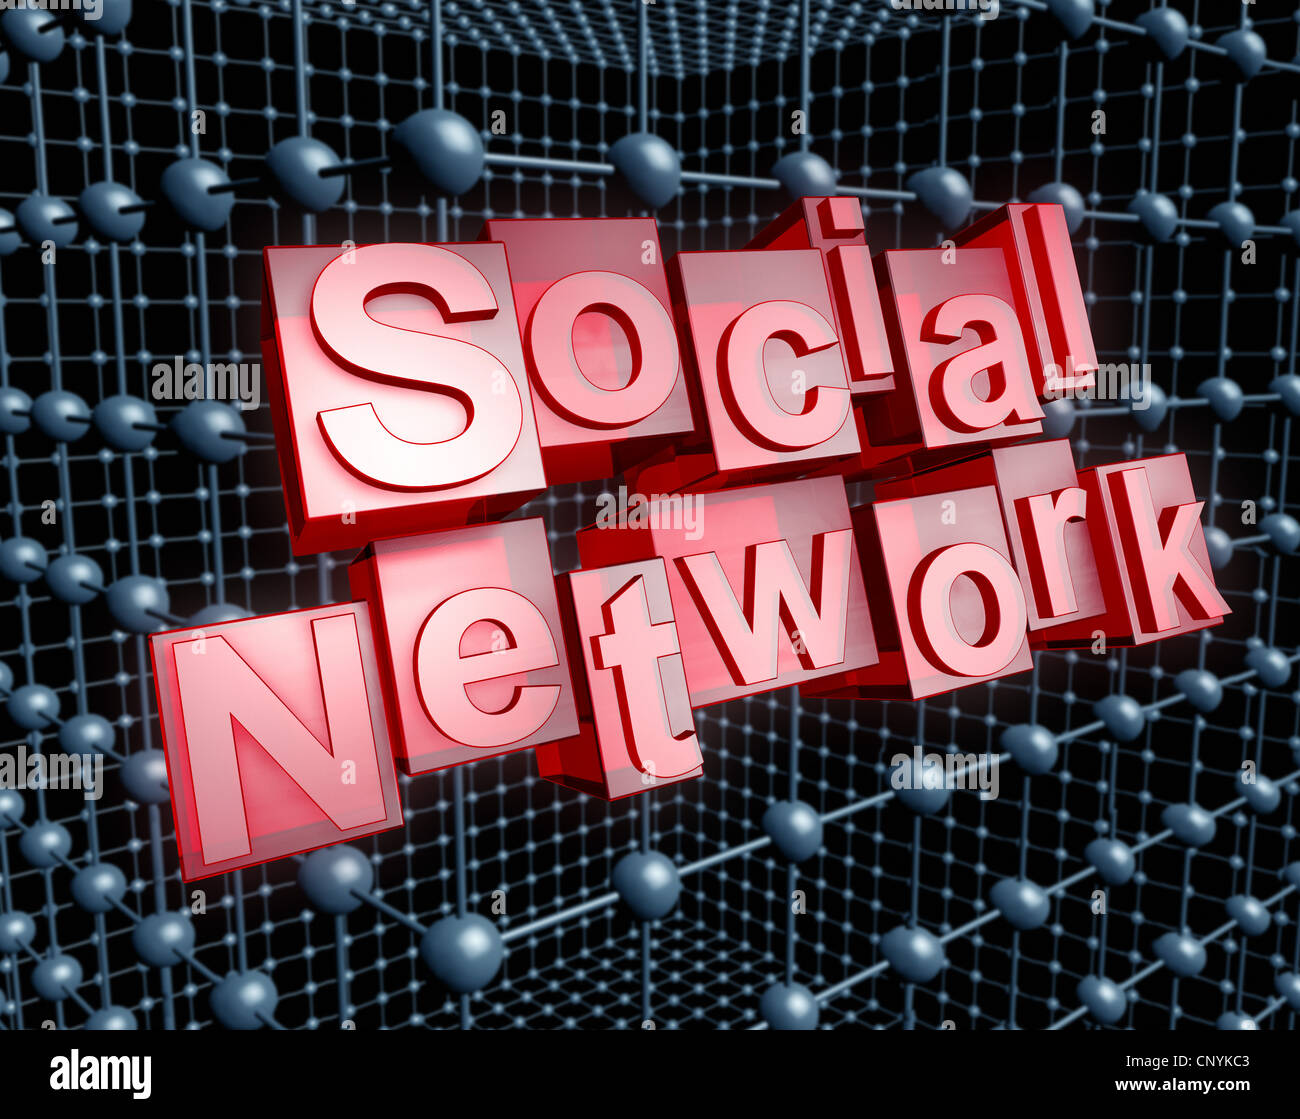 The word 'Social Network' in 3D letters in front of a network structure Stock Photo